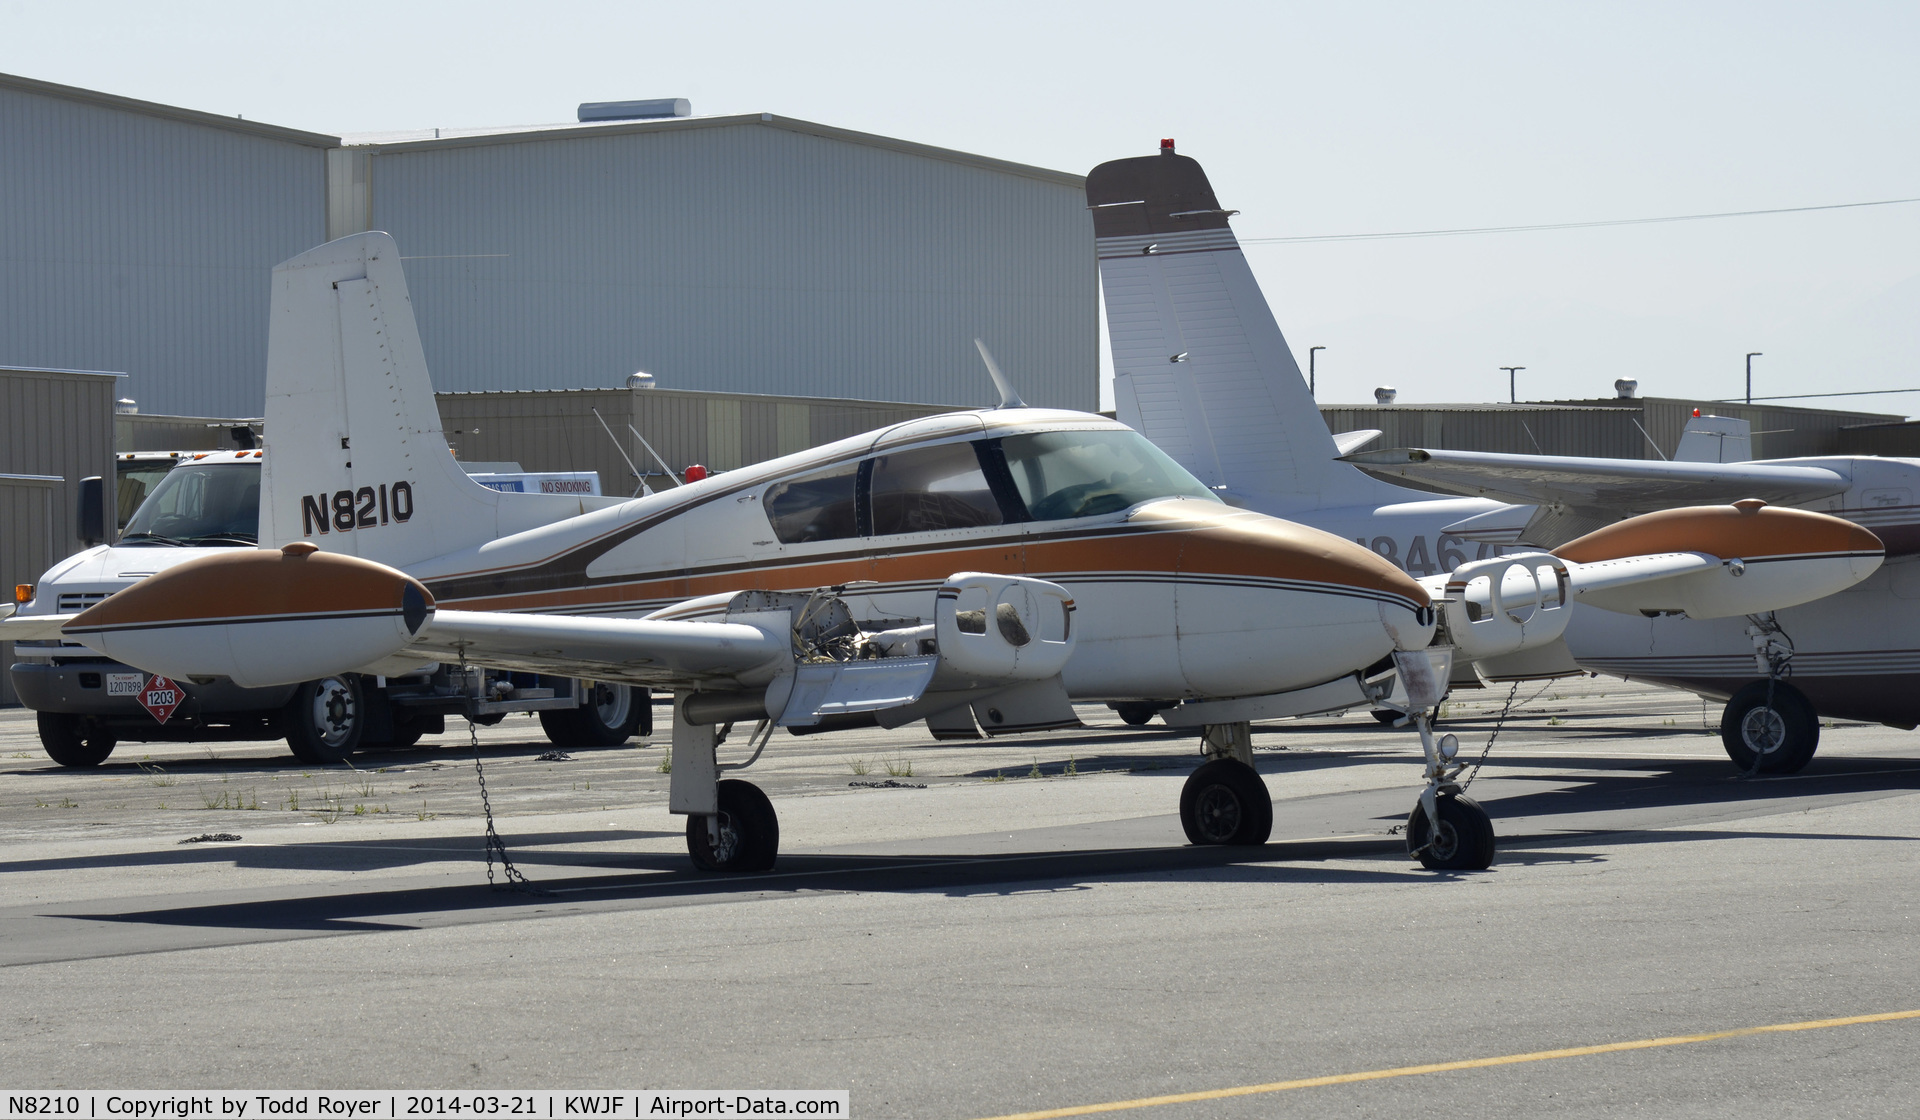 N8210, 1955 Cessna 310 C/N 35172, Maybe parked forever?